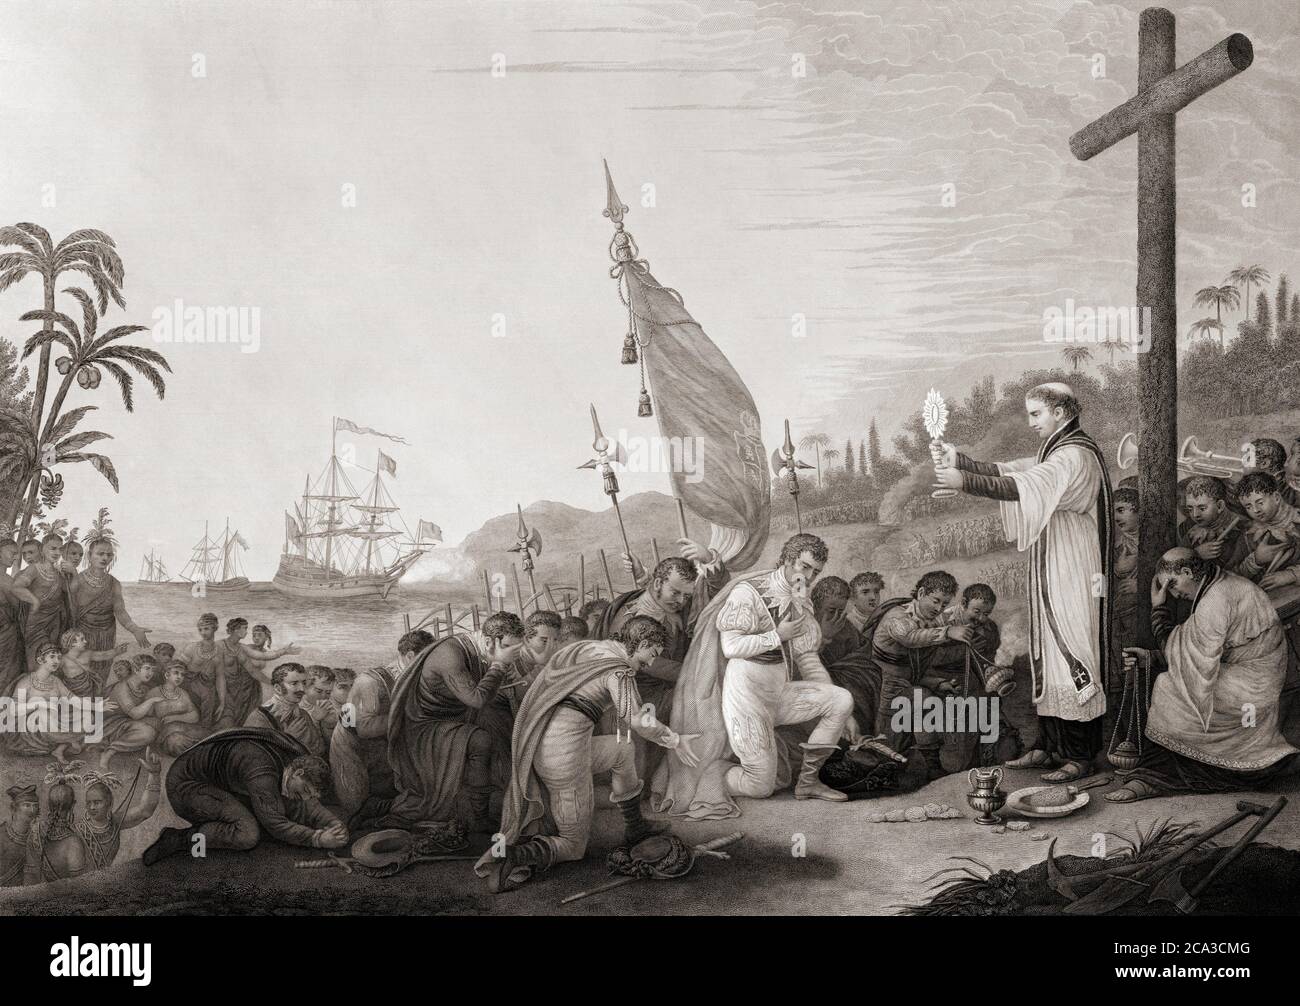 Columbus lands in the New World. From a 19th century engraving by George Lang, after a work by John James Barralet. Stock Photo